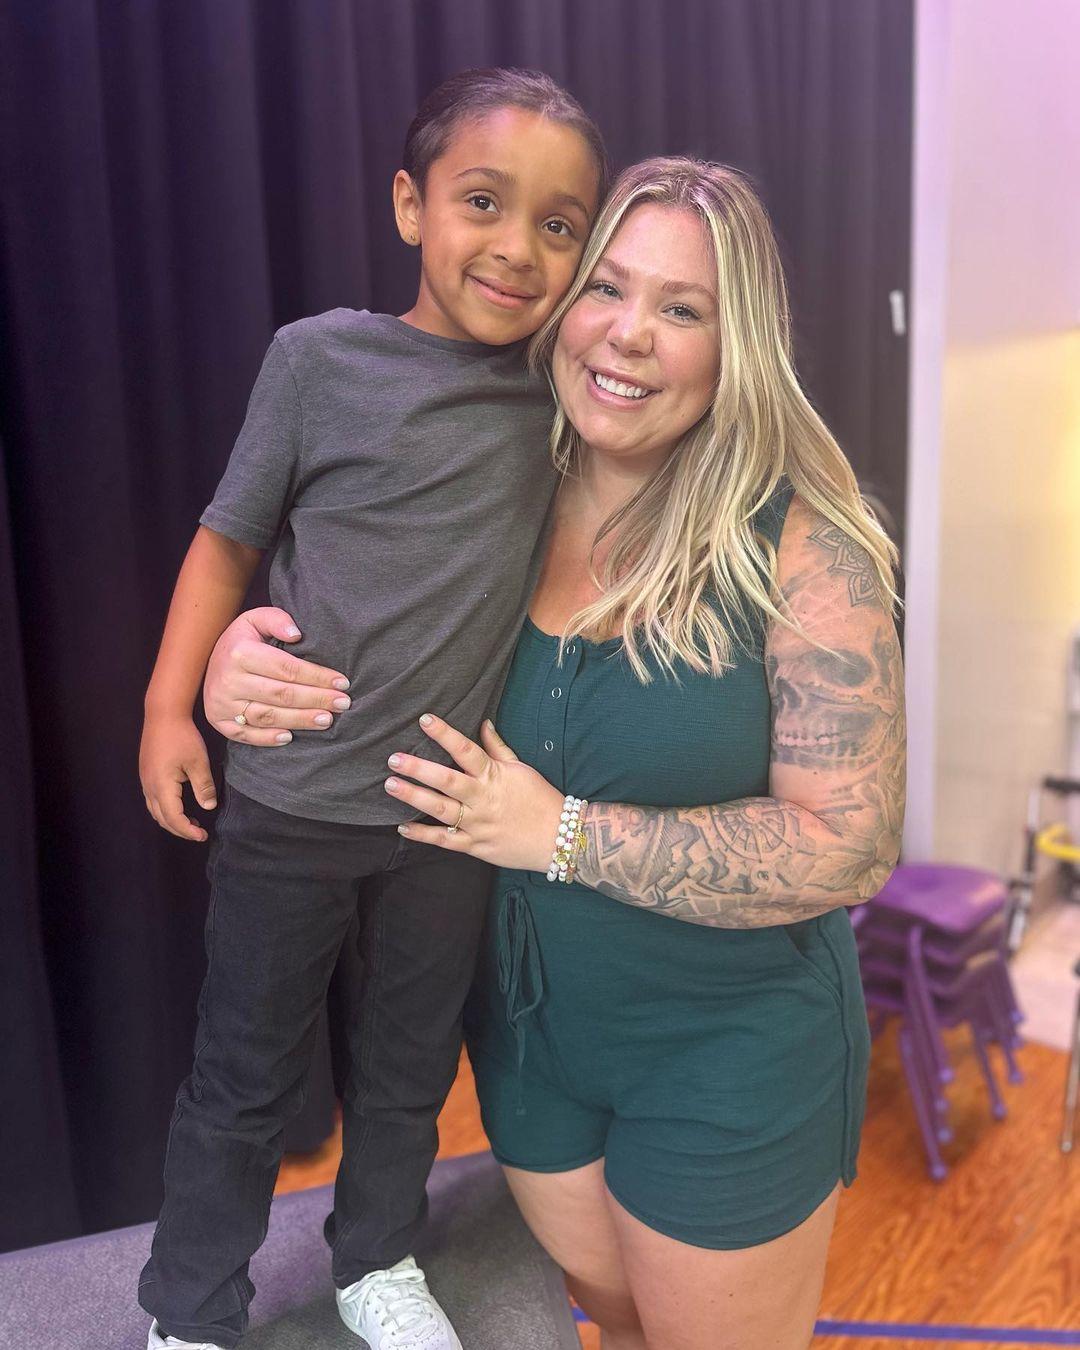 Fans Shocking Reaction To 'Teen Mom' Kail Lowry's Admission Of Having Another Baby